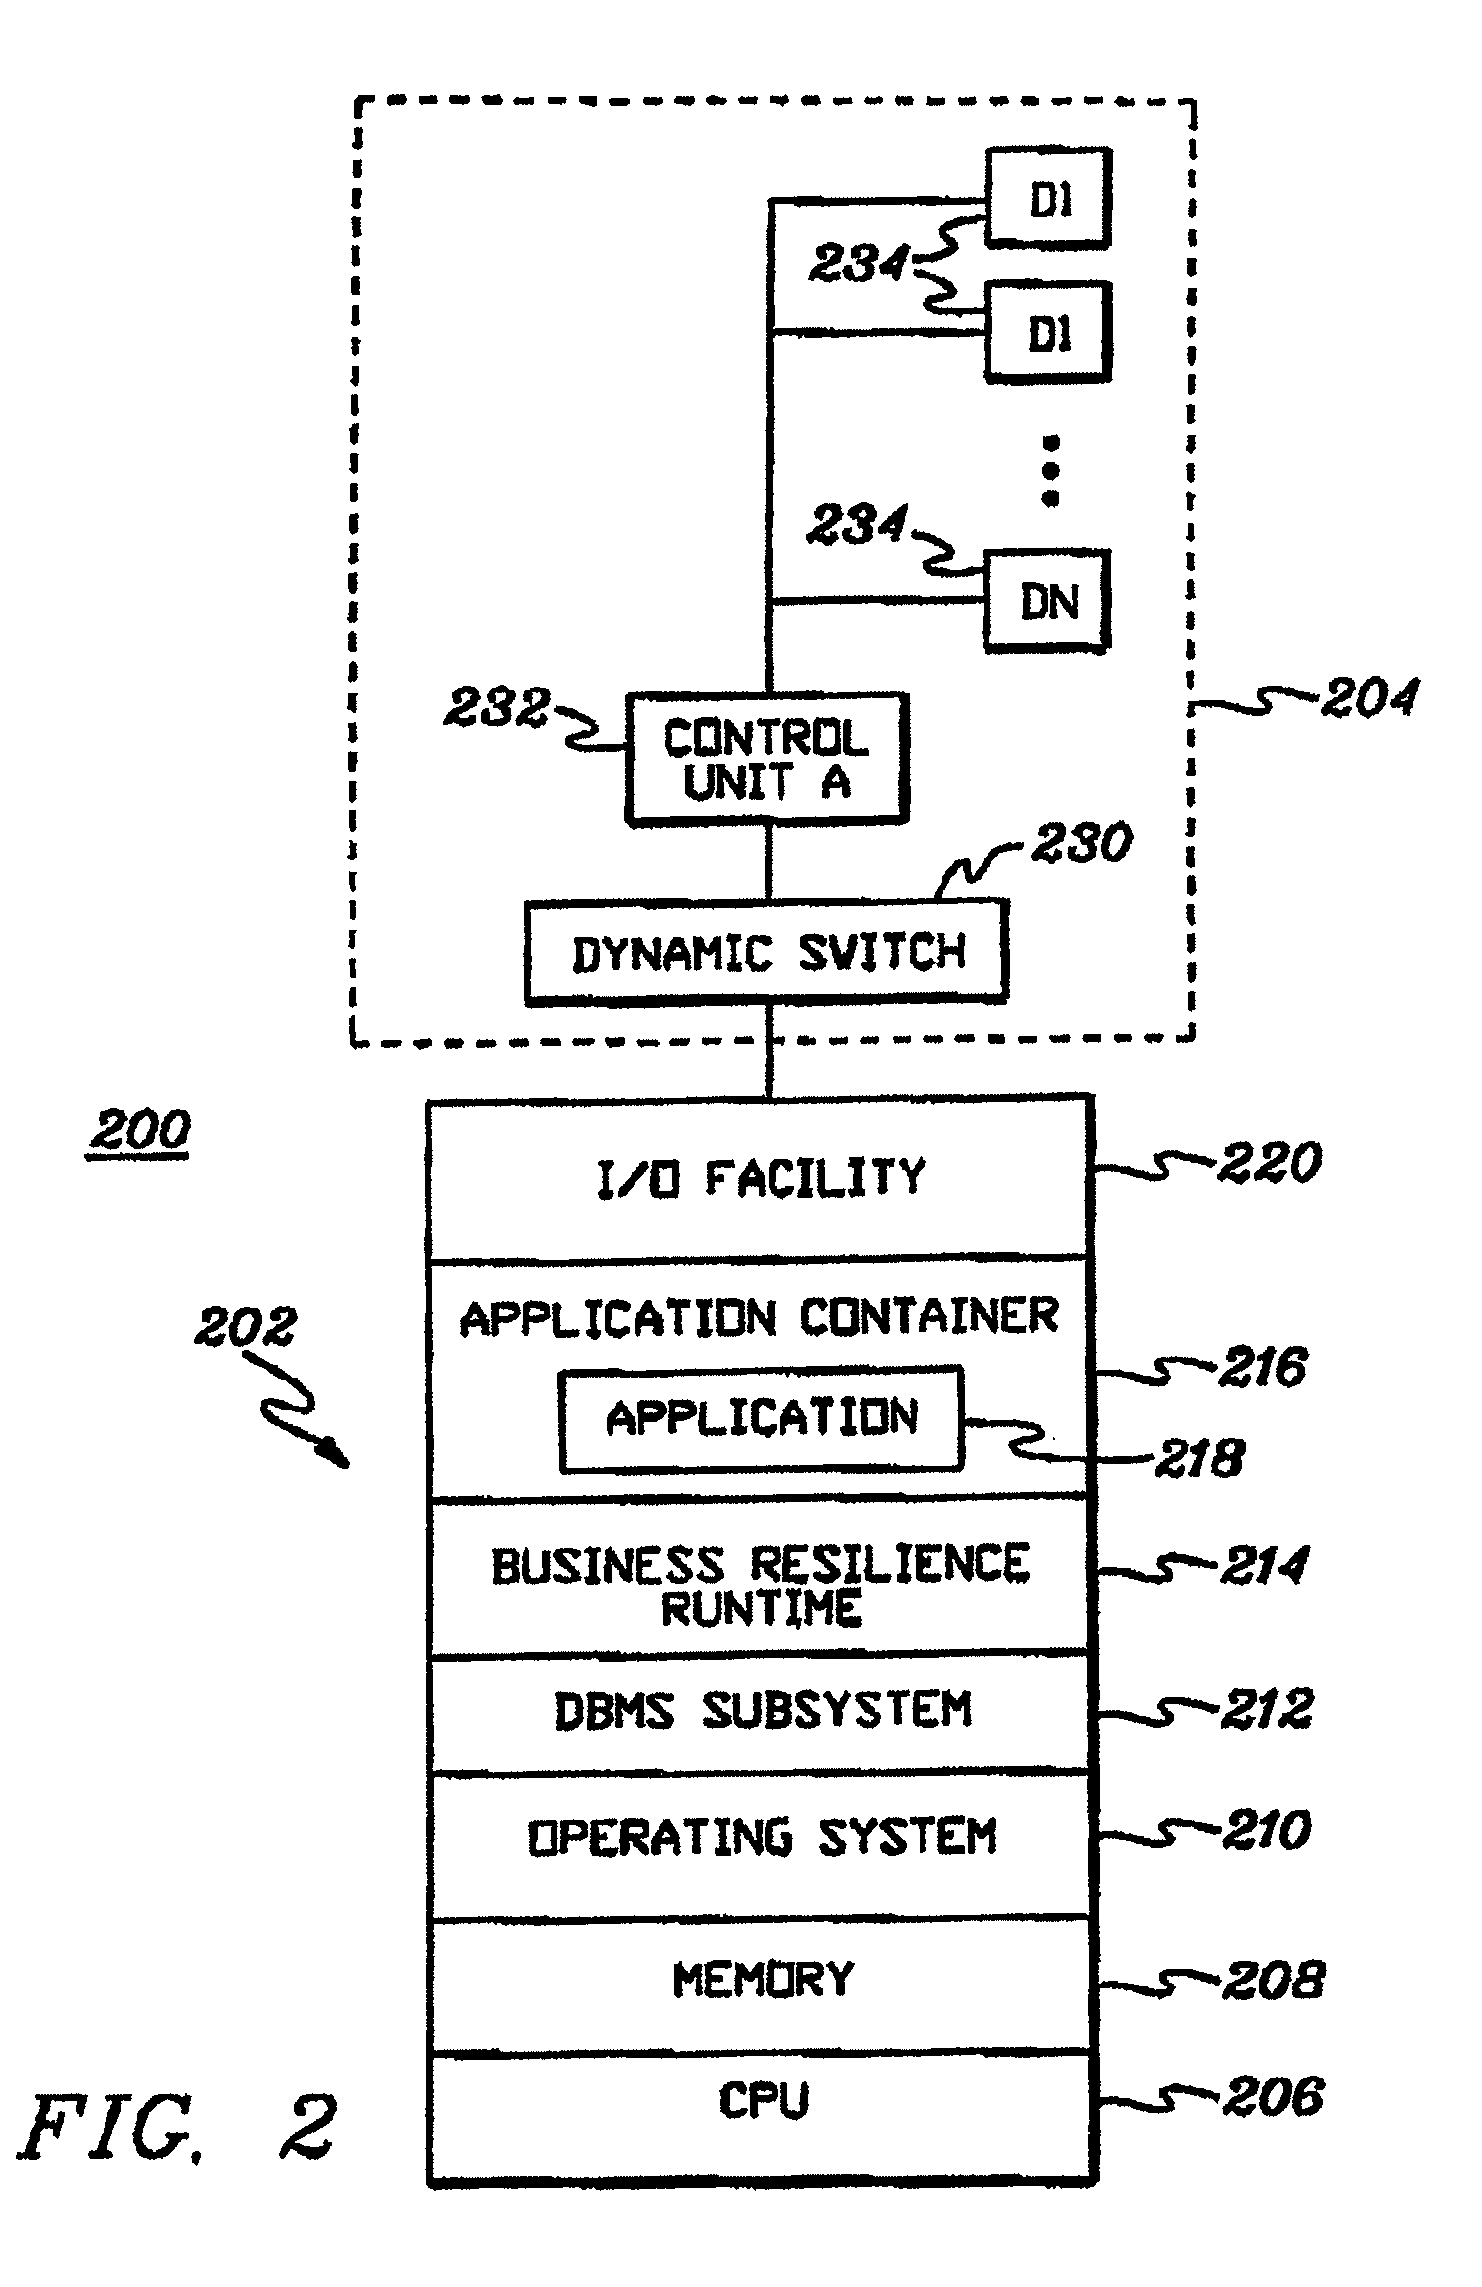 Adaptive business resiliency computer system for information technology environments